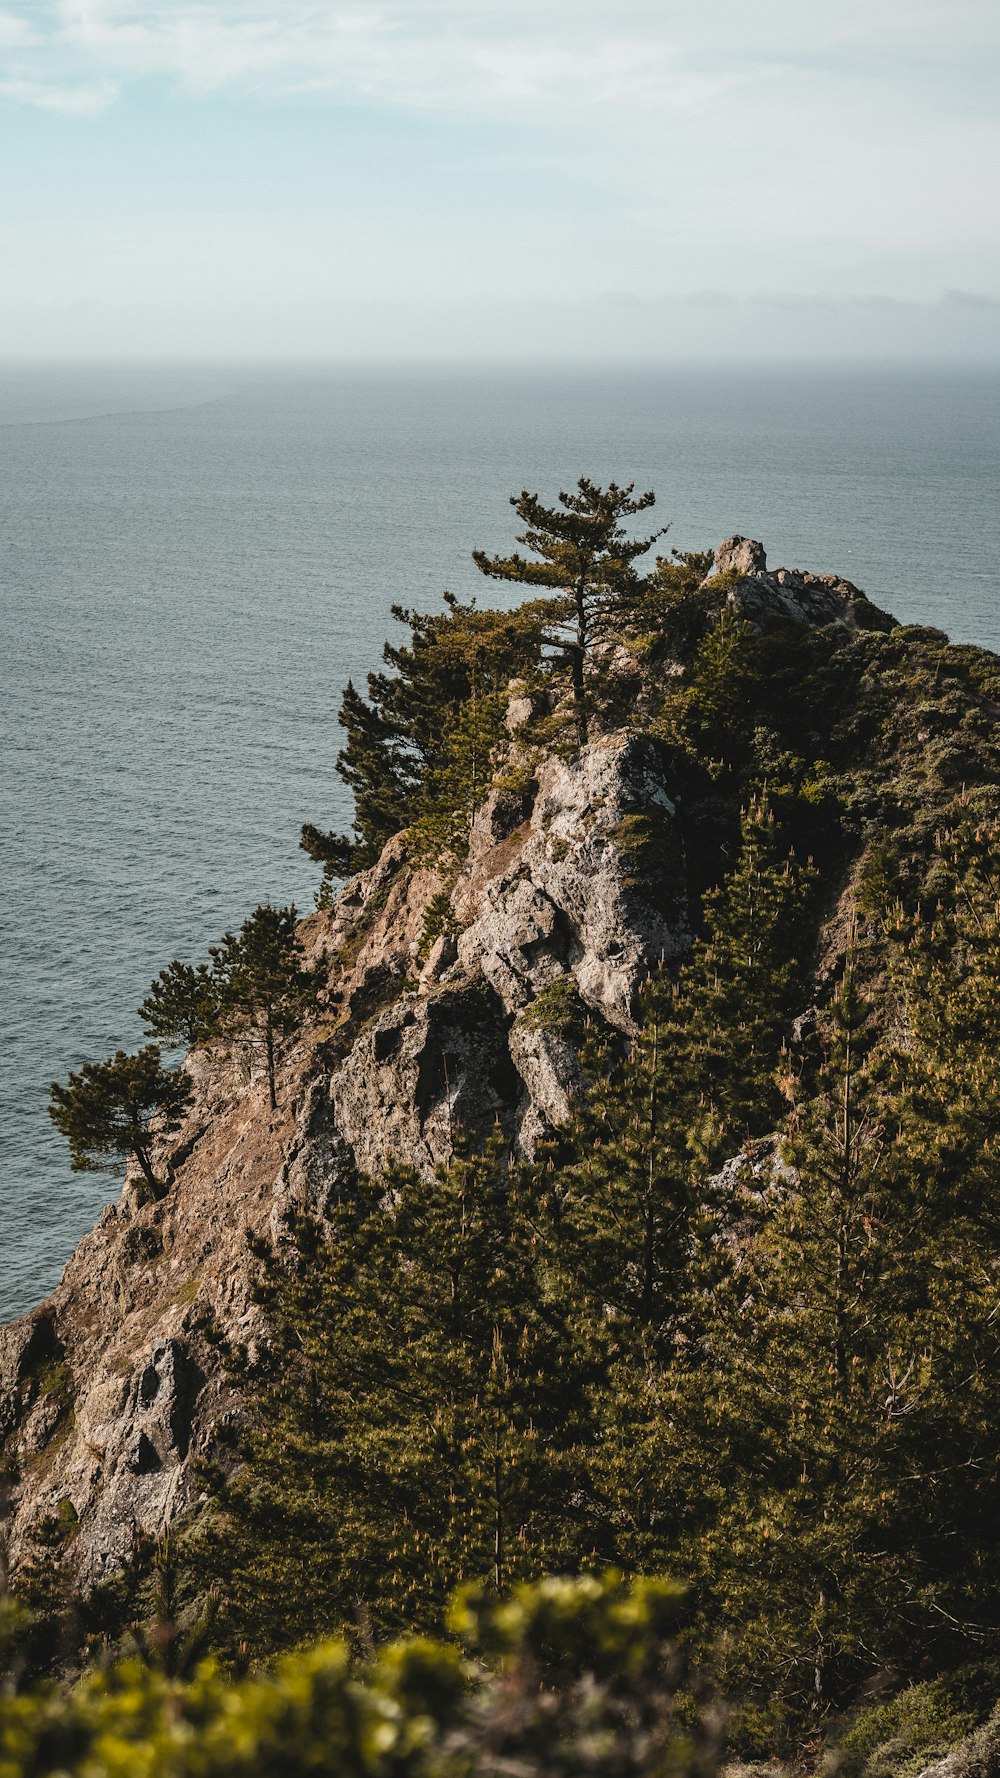 green trees on brown rock formation near sea during daytime